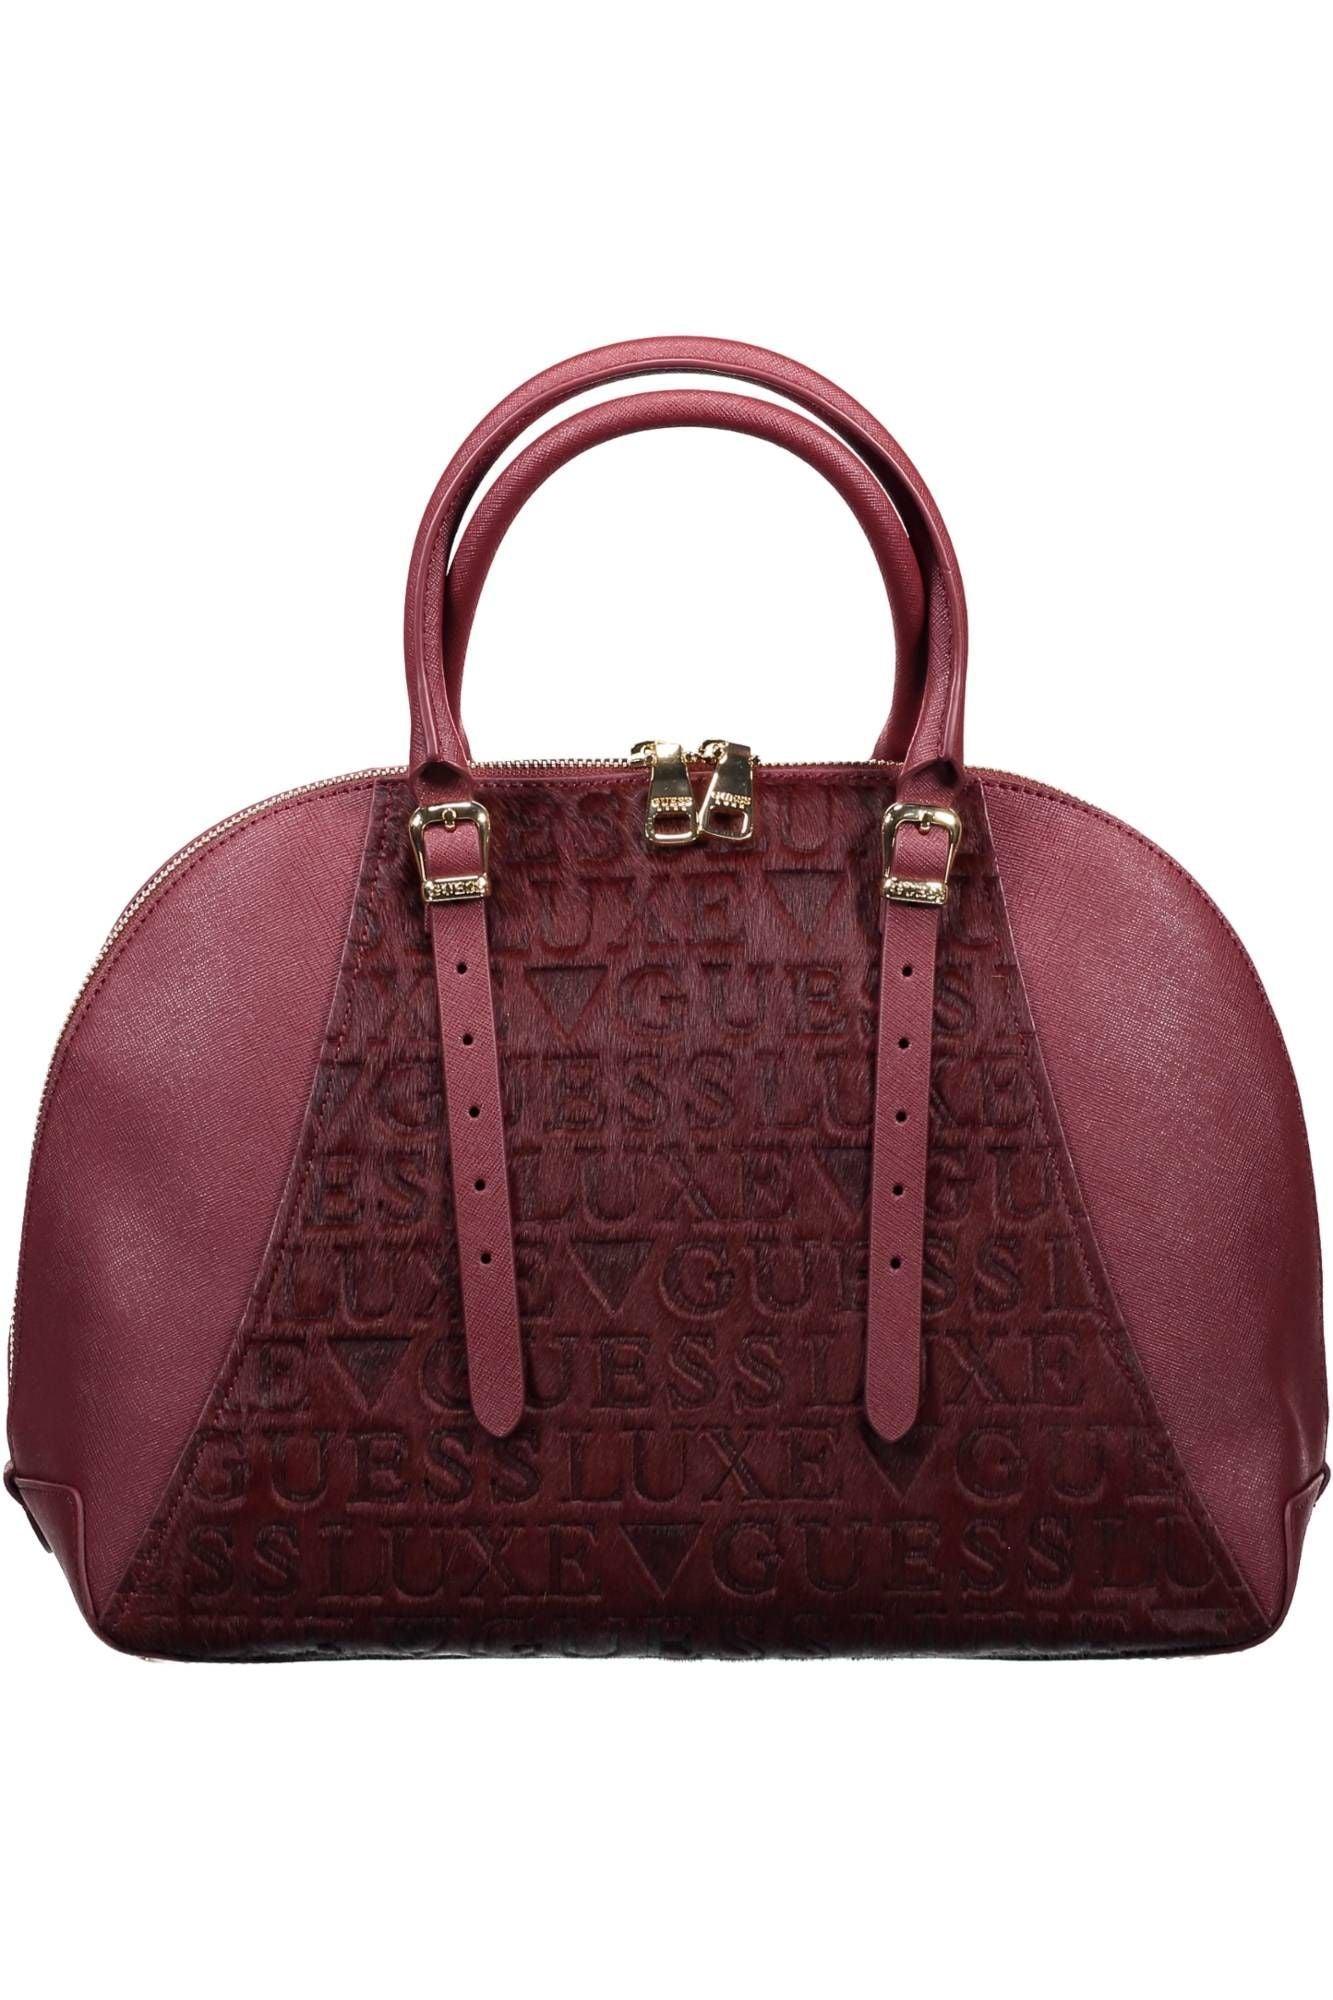 Guess Purple Leather Handbag in Red | Lyst